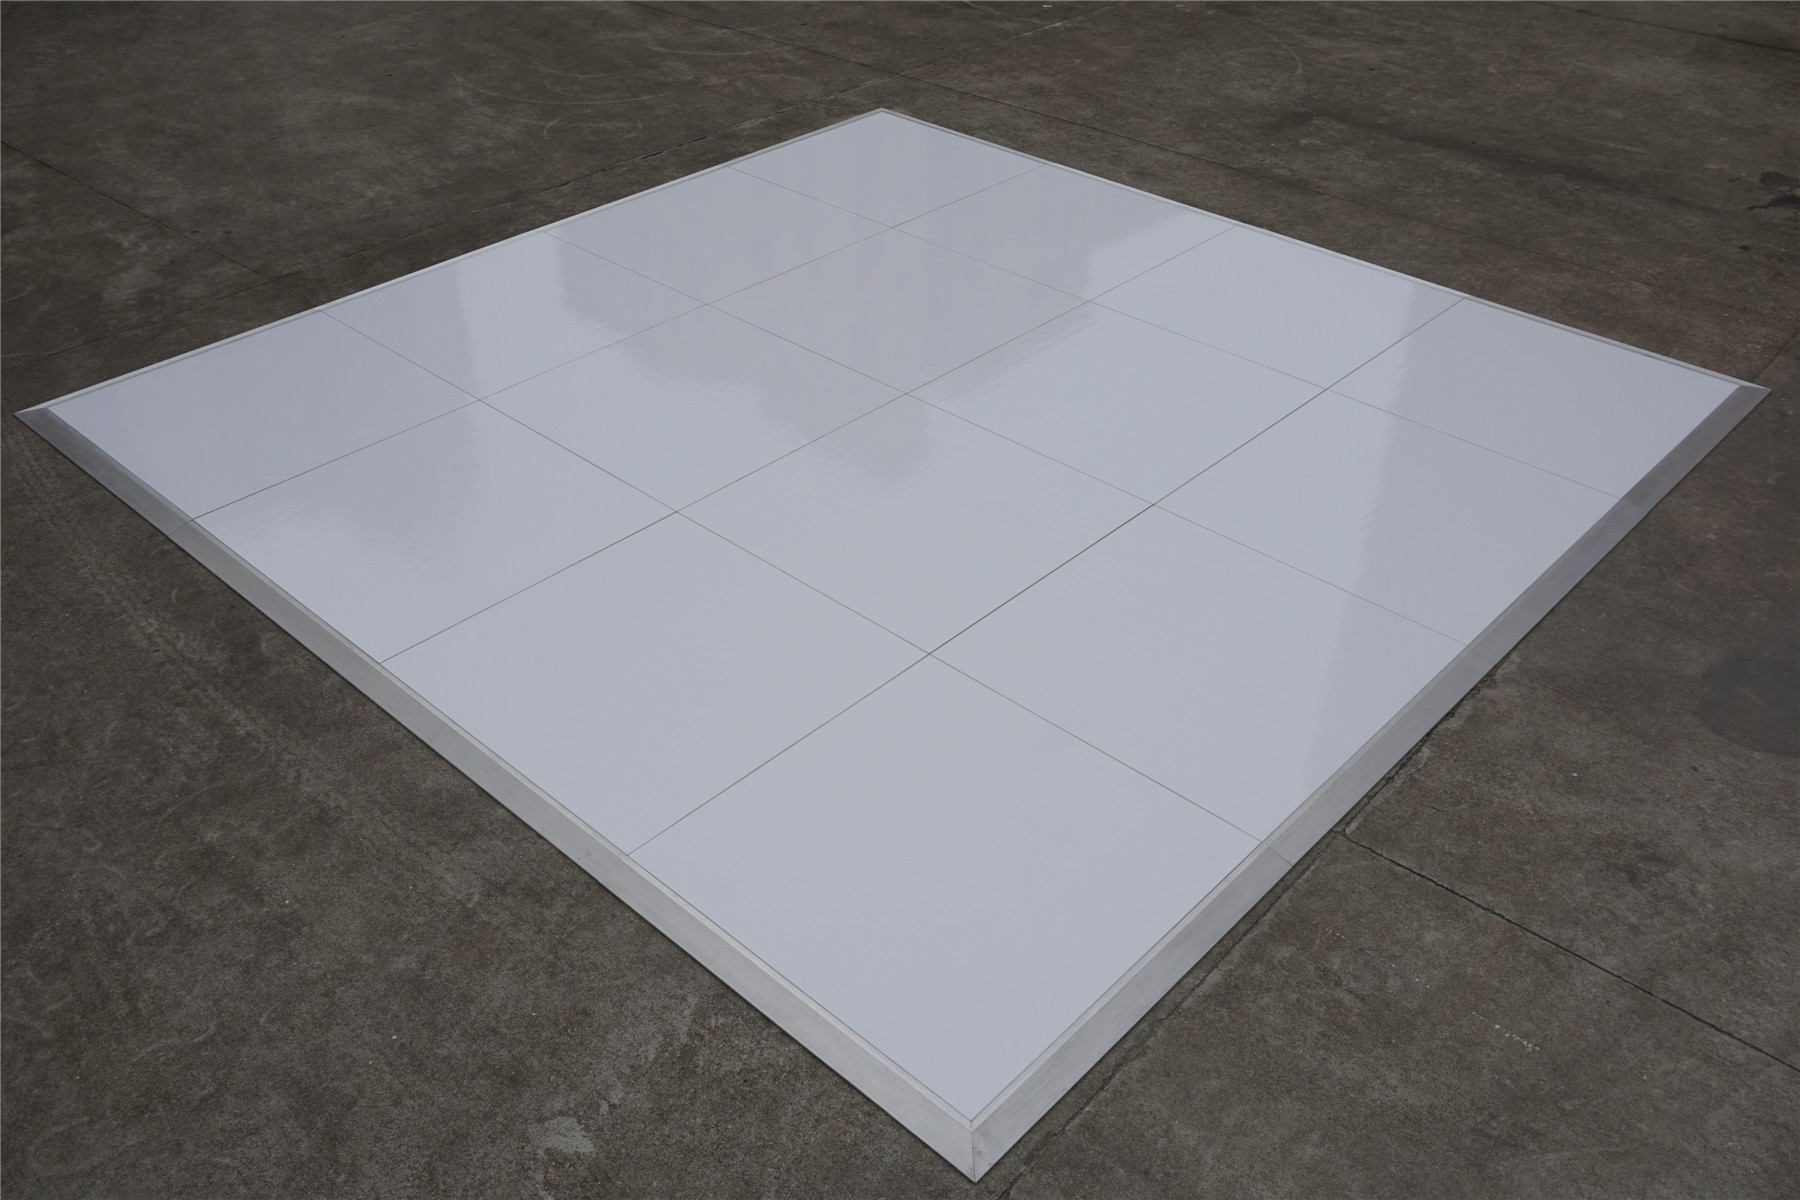 High gloss white dance floor --Interlock system ,no holes or joints on surface .